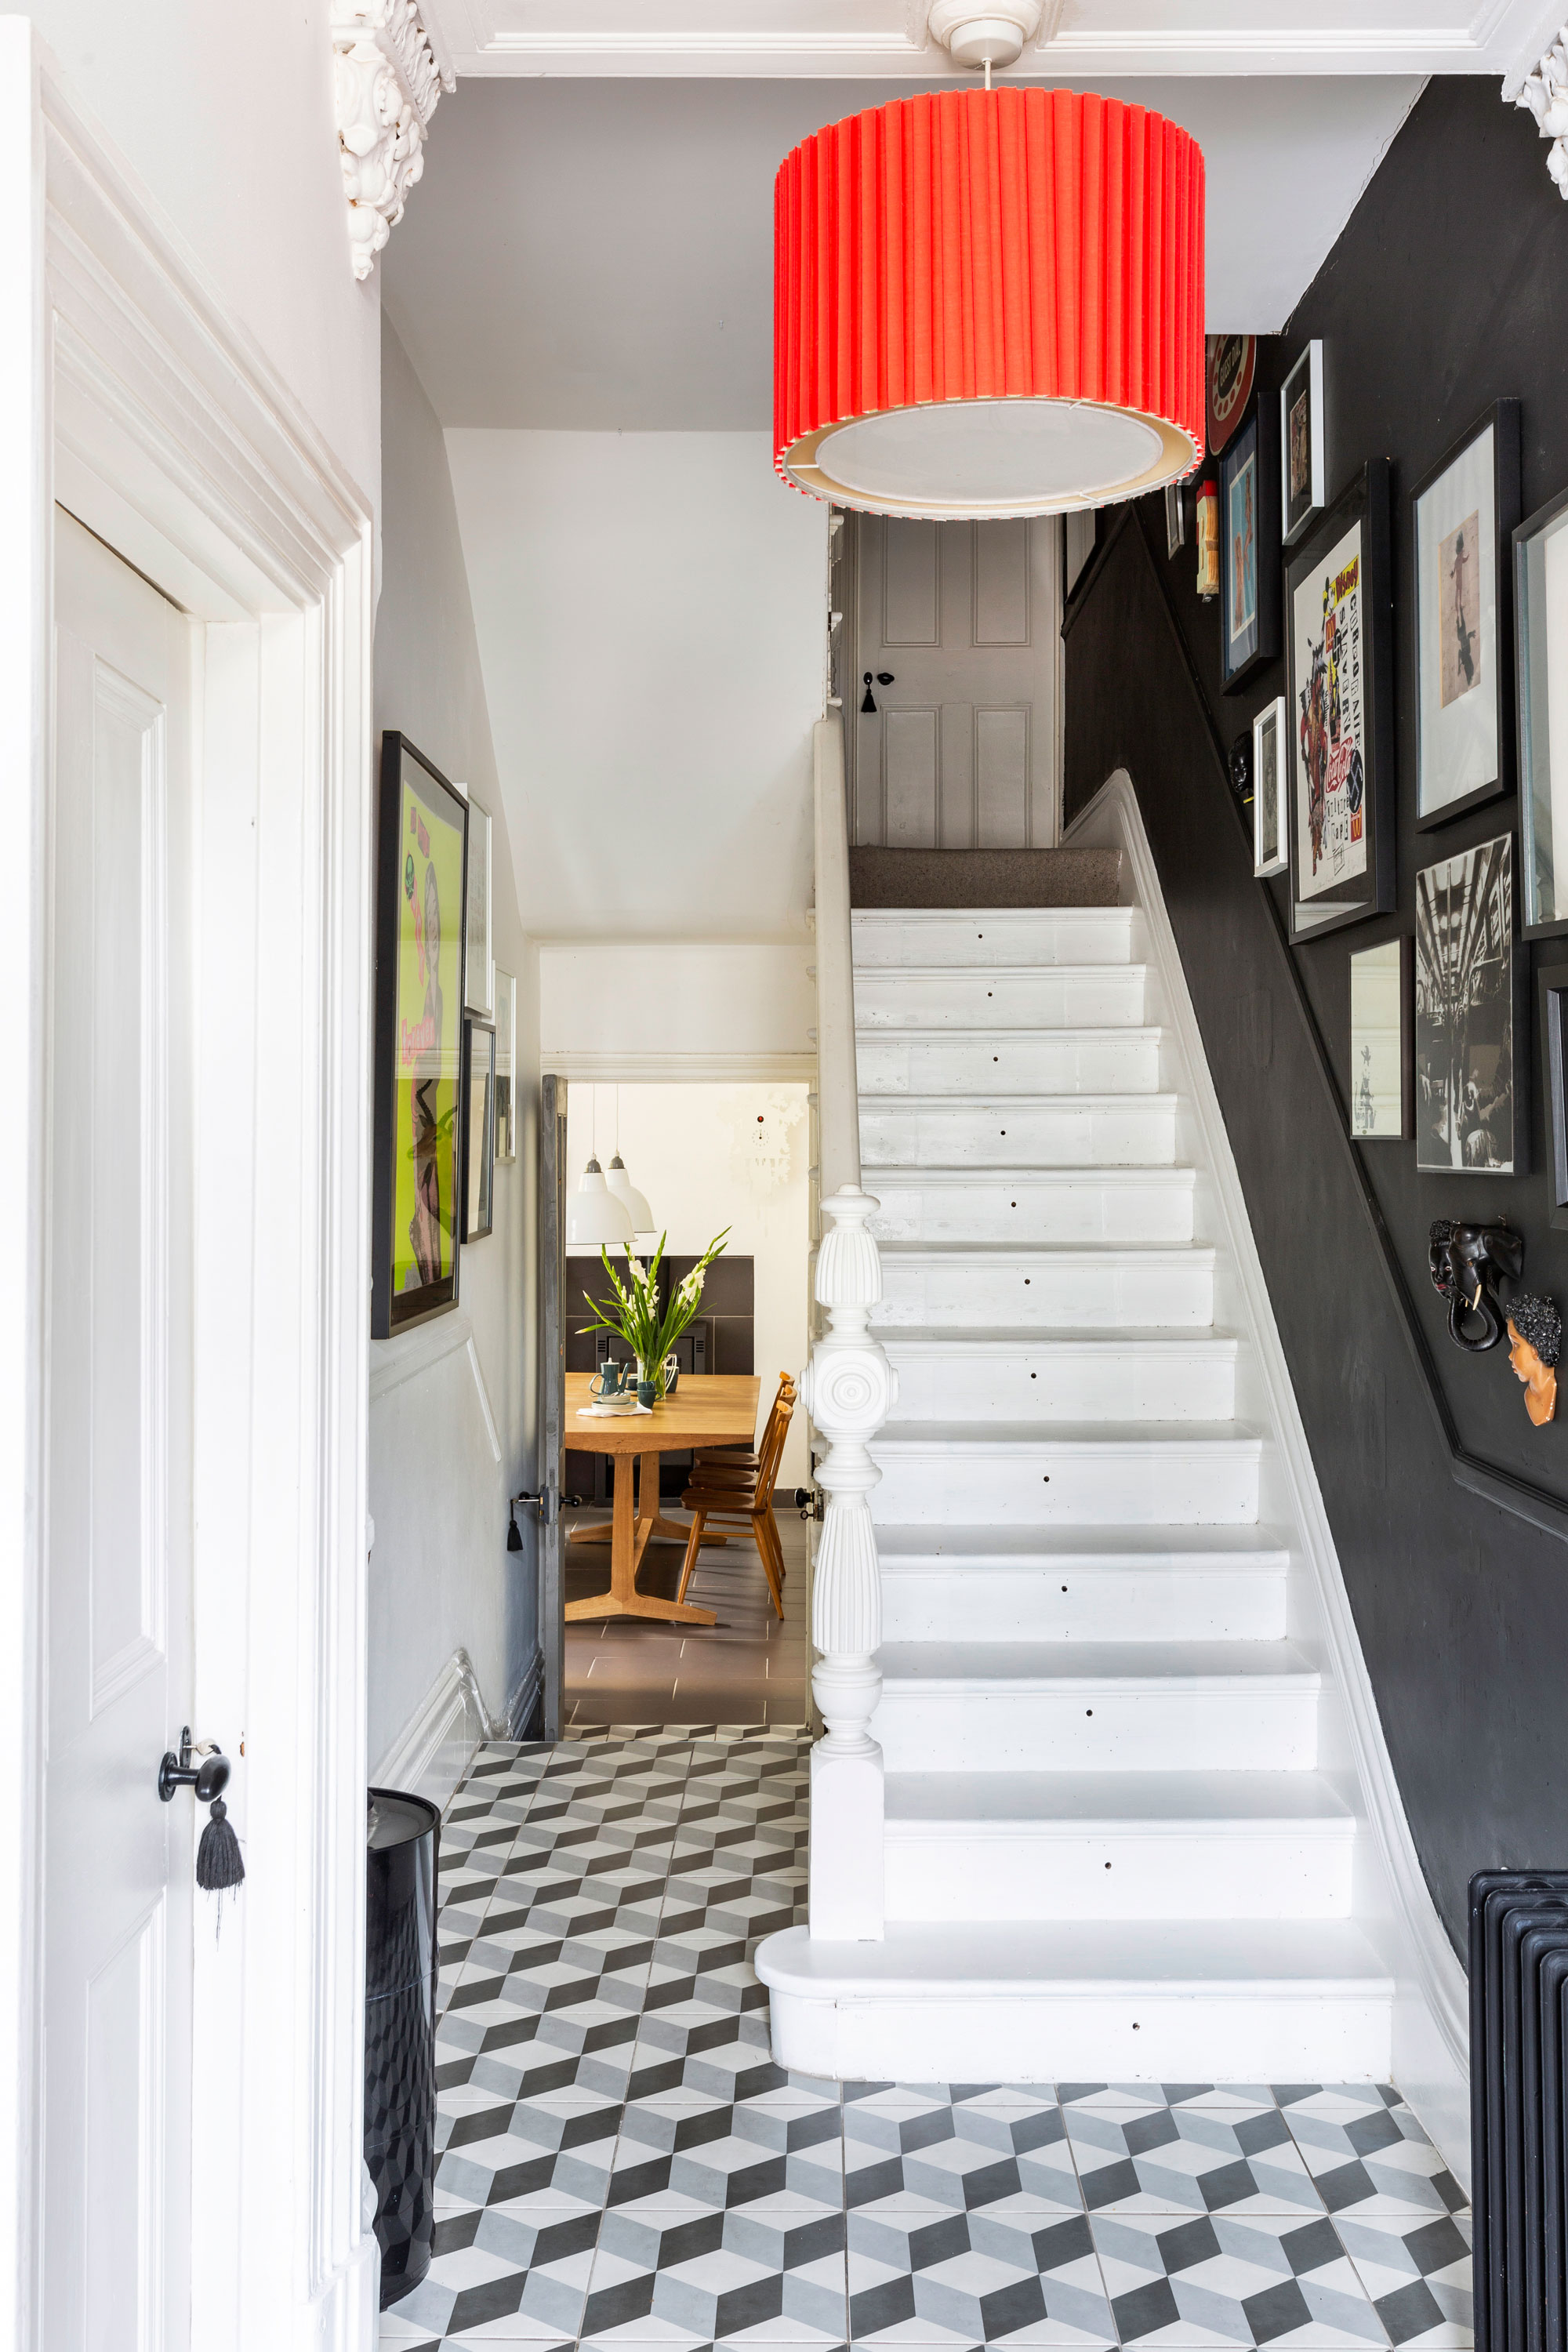 Matt and Emma Rawlinson transformed a run-down property full of bedsits in Cheltenham into a vibrant family home